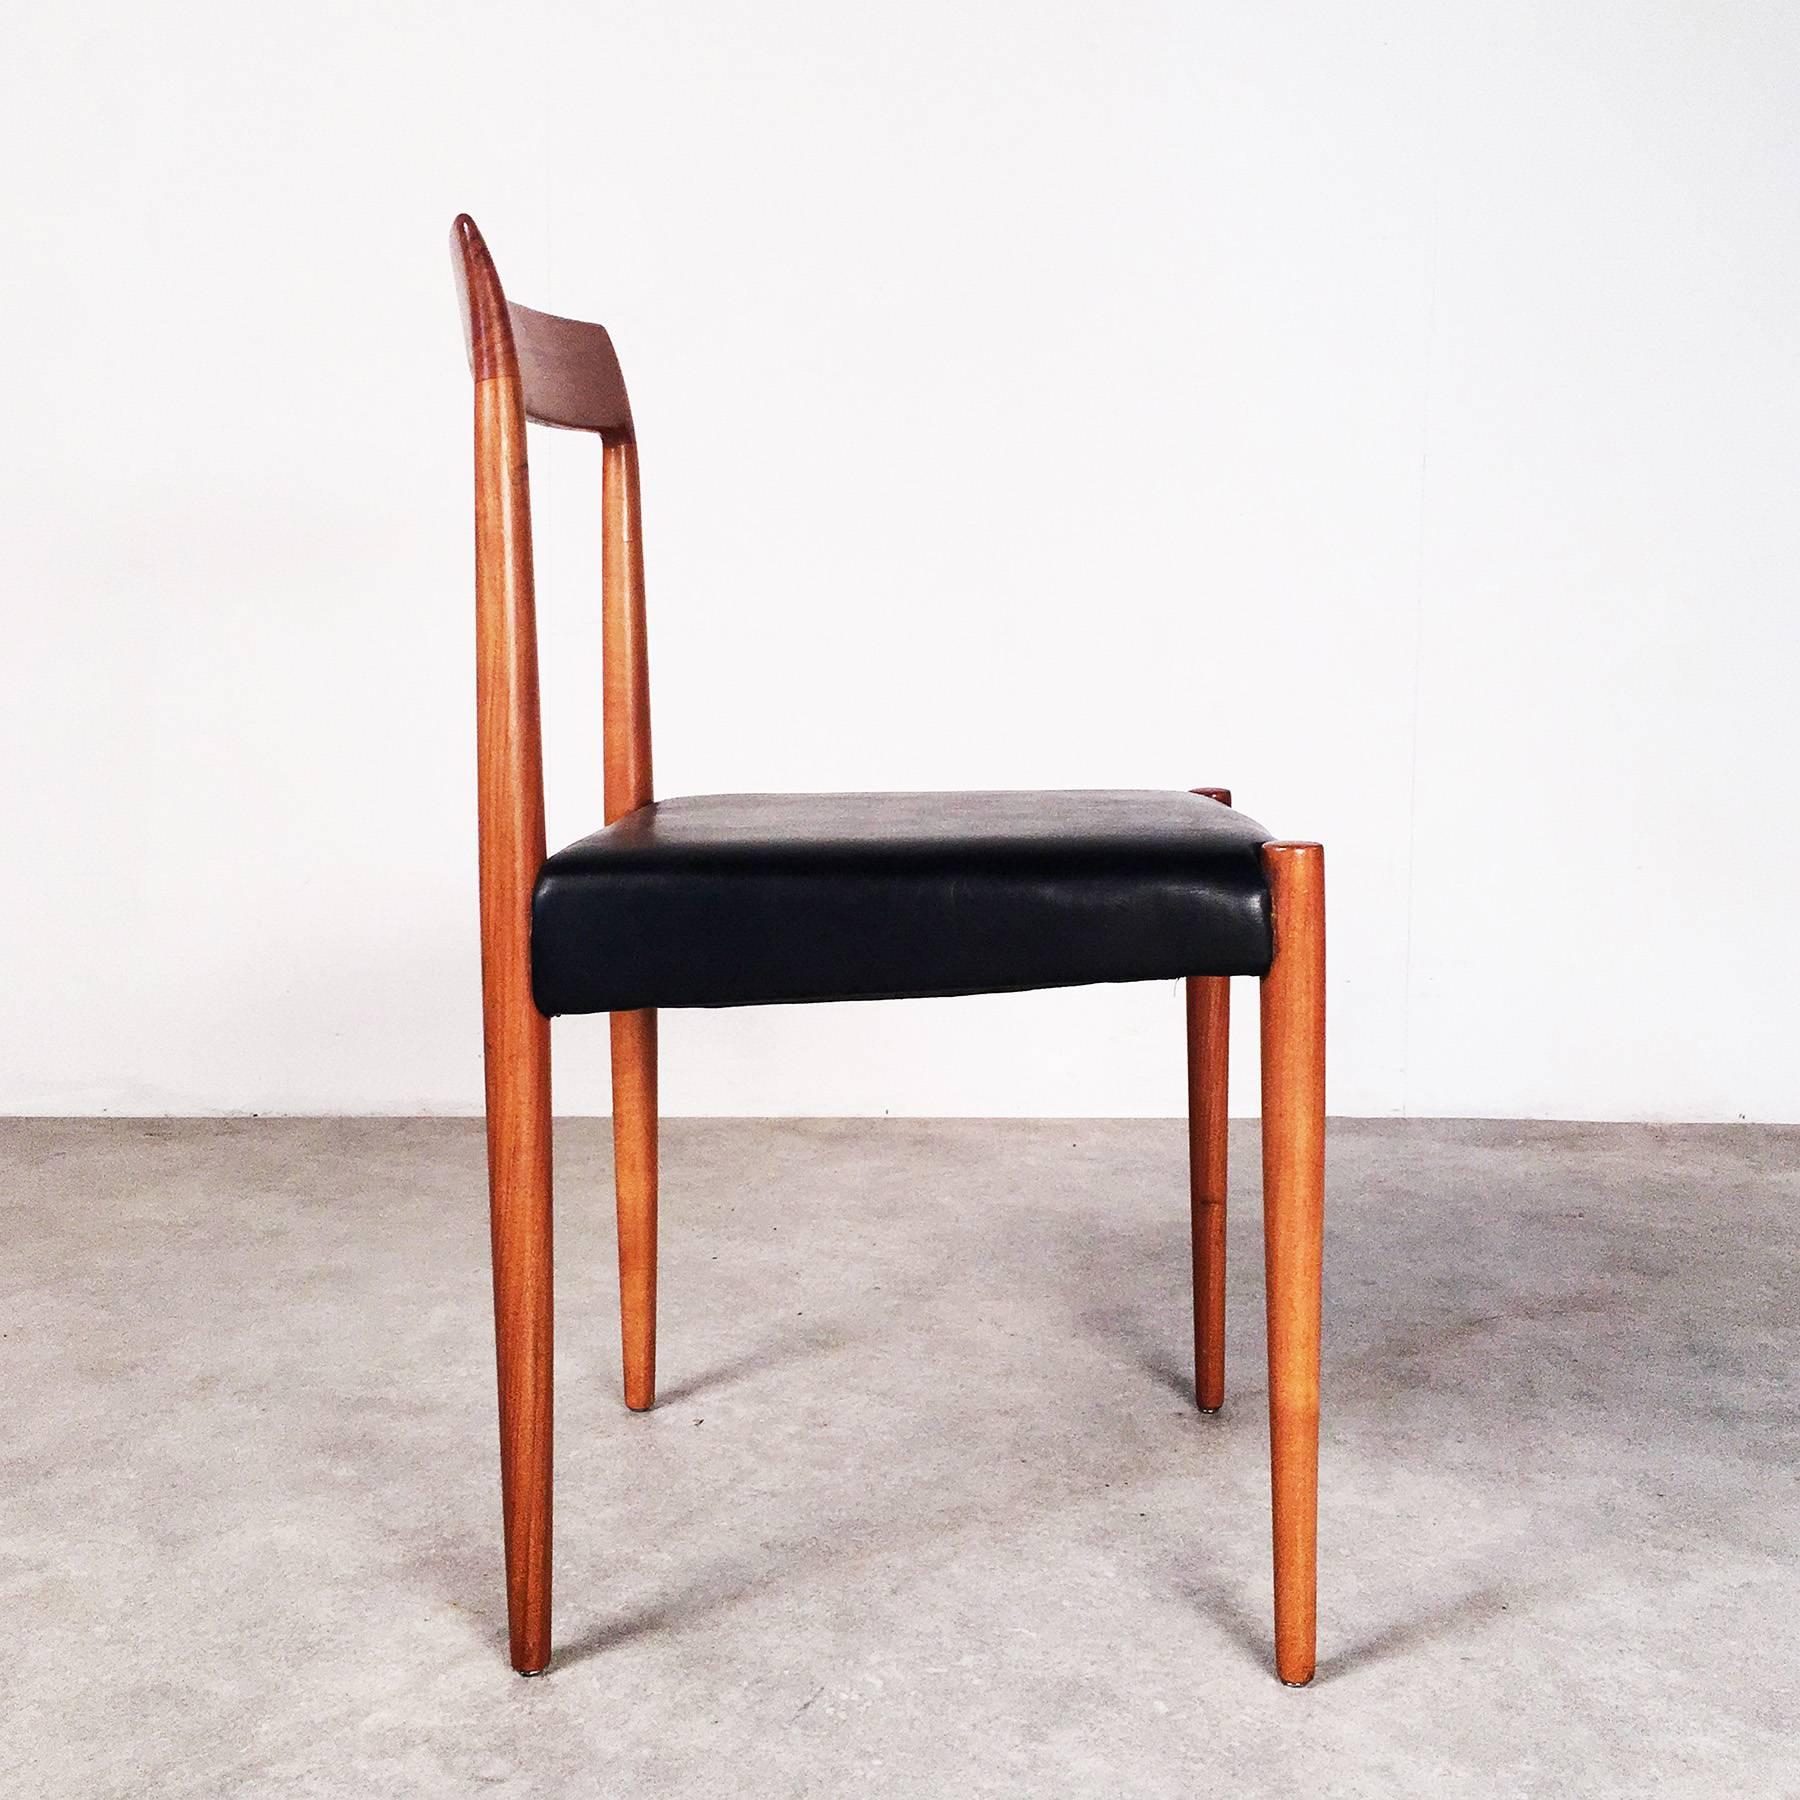 Modern Six Dining Chairs from the 1960s, Manufactured by Lübke